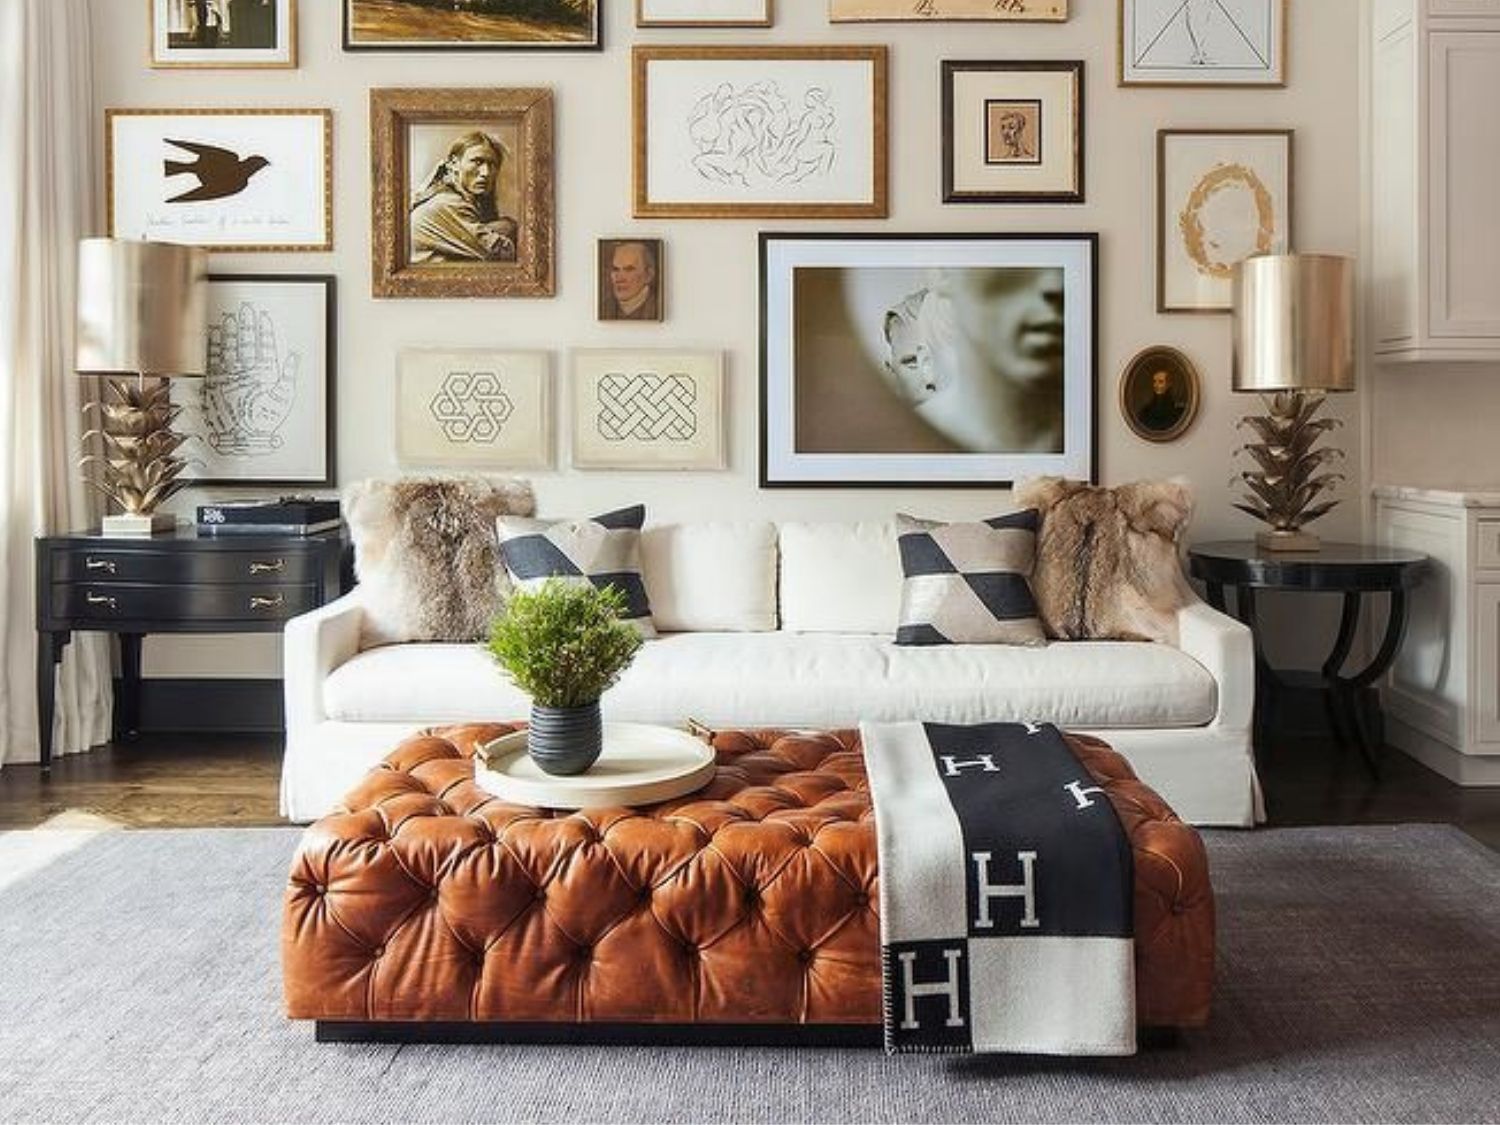 Leather upholstered ottoman in luxury living room design